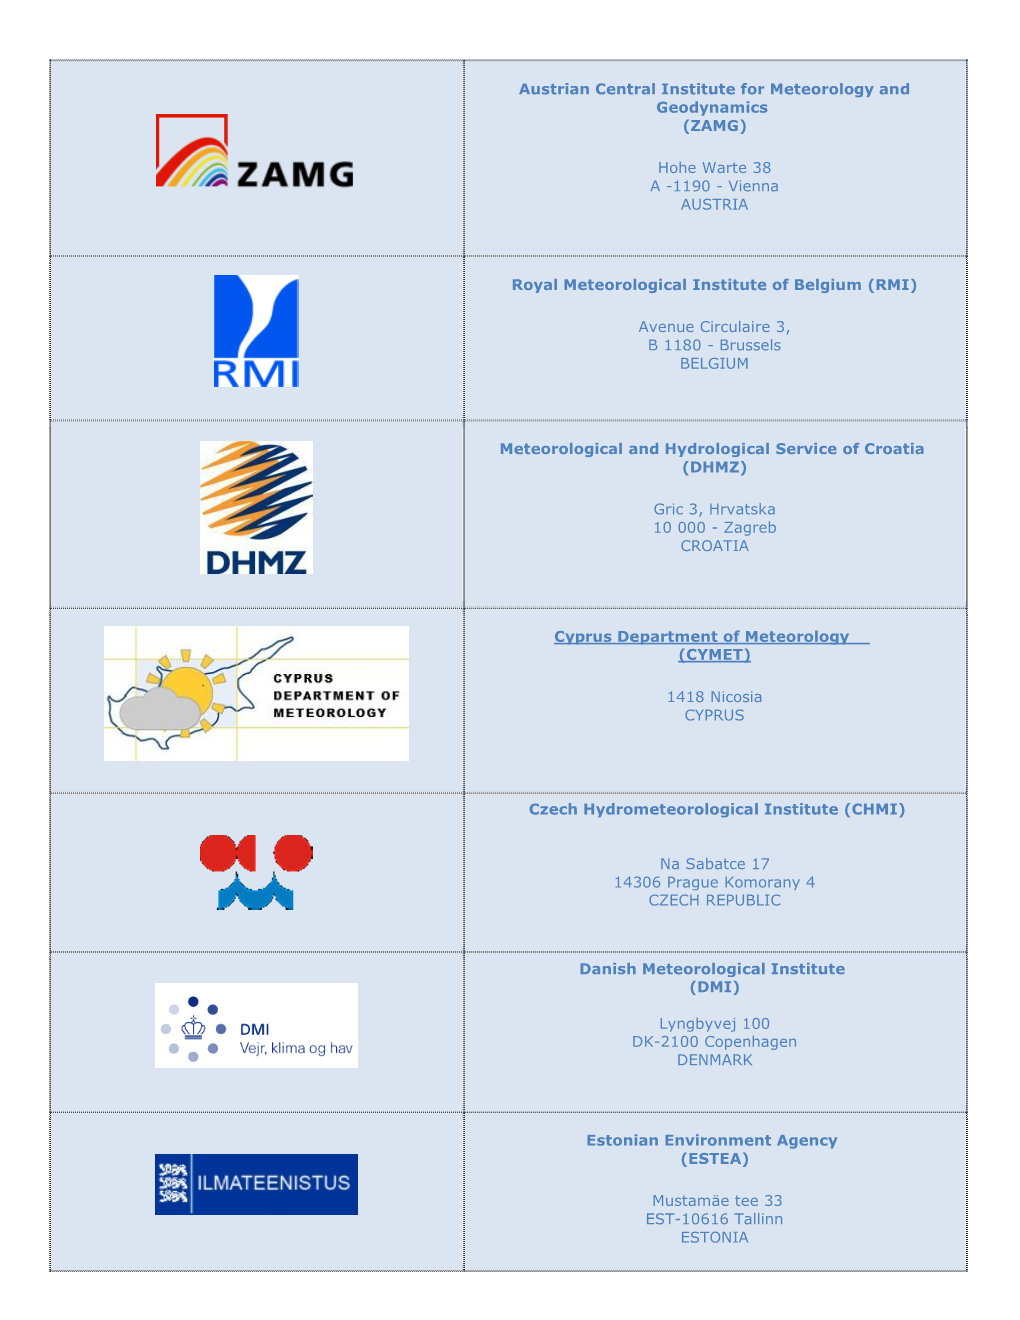 Austrian Central Institute for Meteorology and Geodynamics (ZAMG)